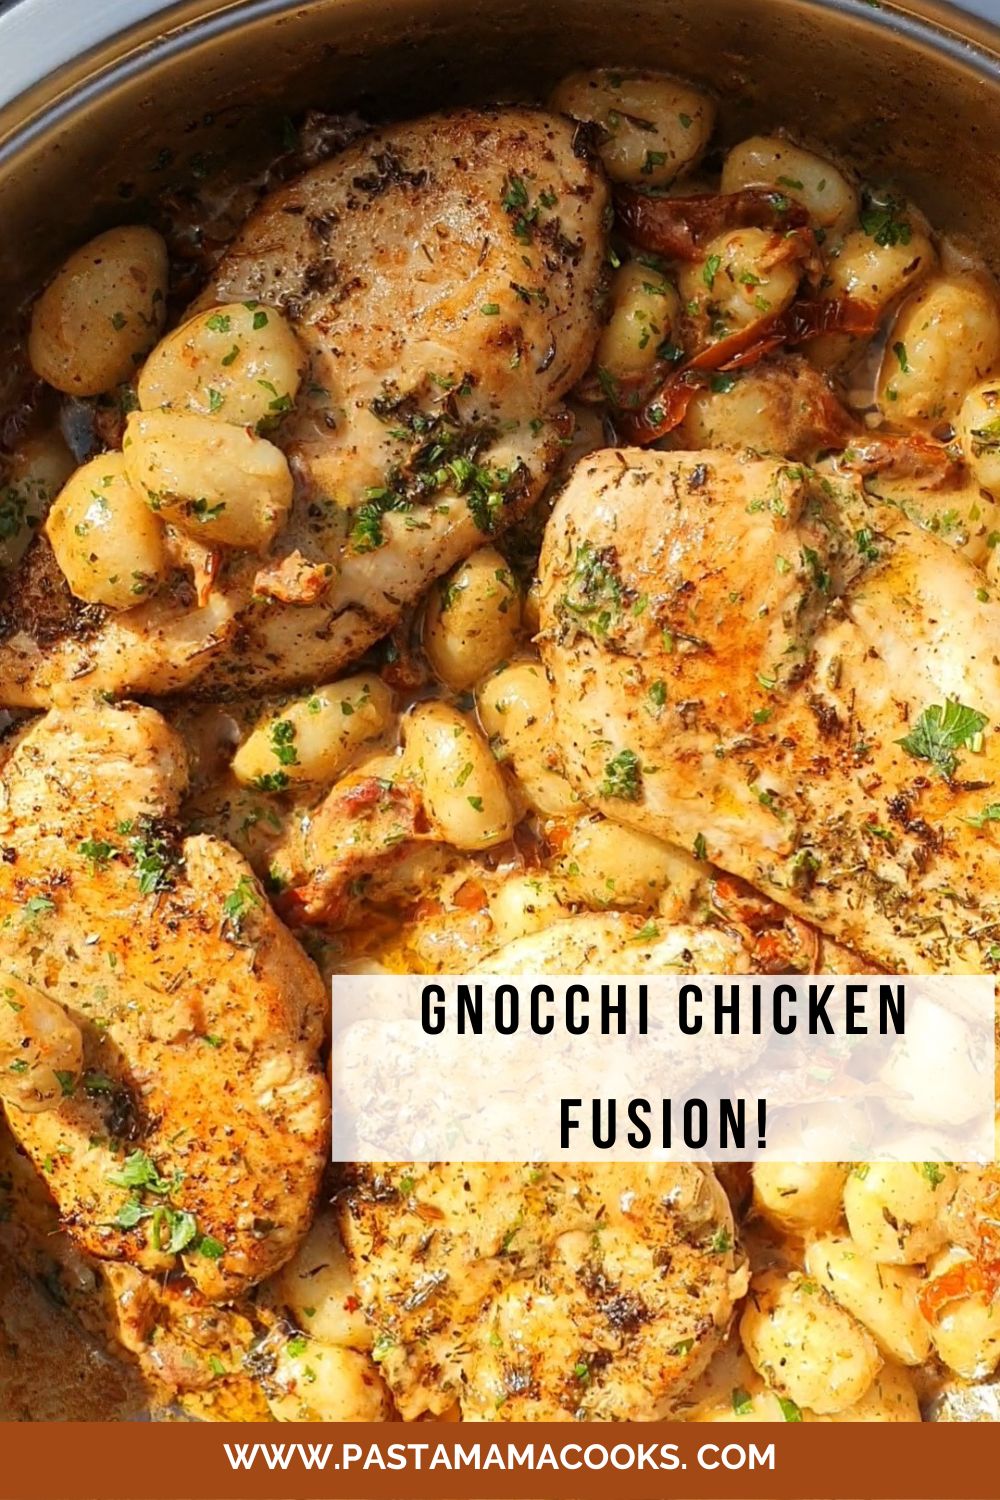 chicken-gnocchi-with-sun-dried-tomatoes.